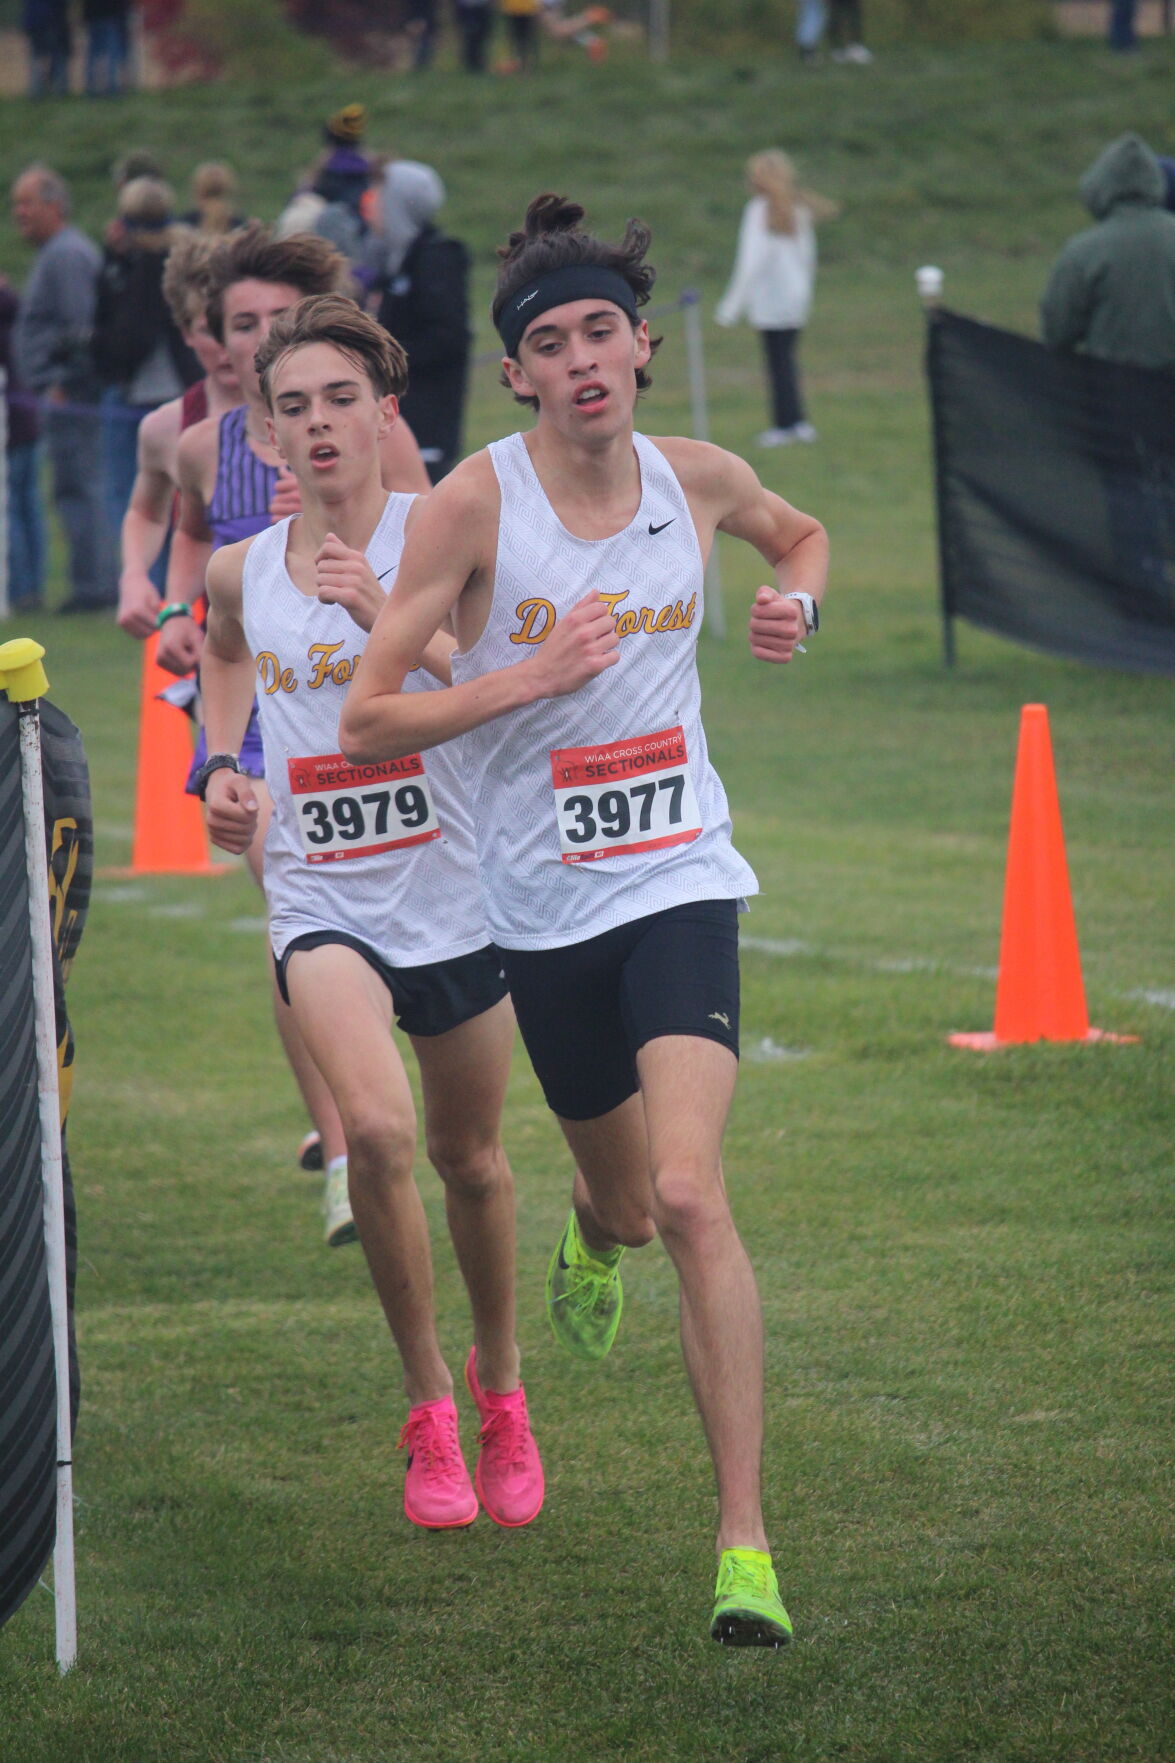 Cross country: Pabon, Tanner headed to state